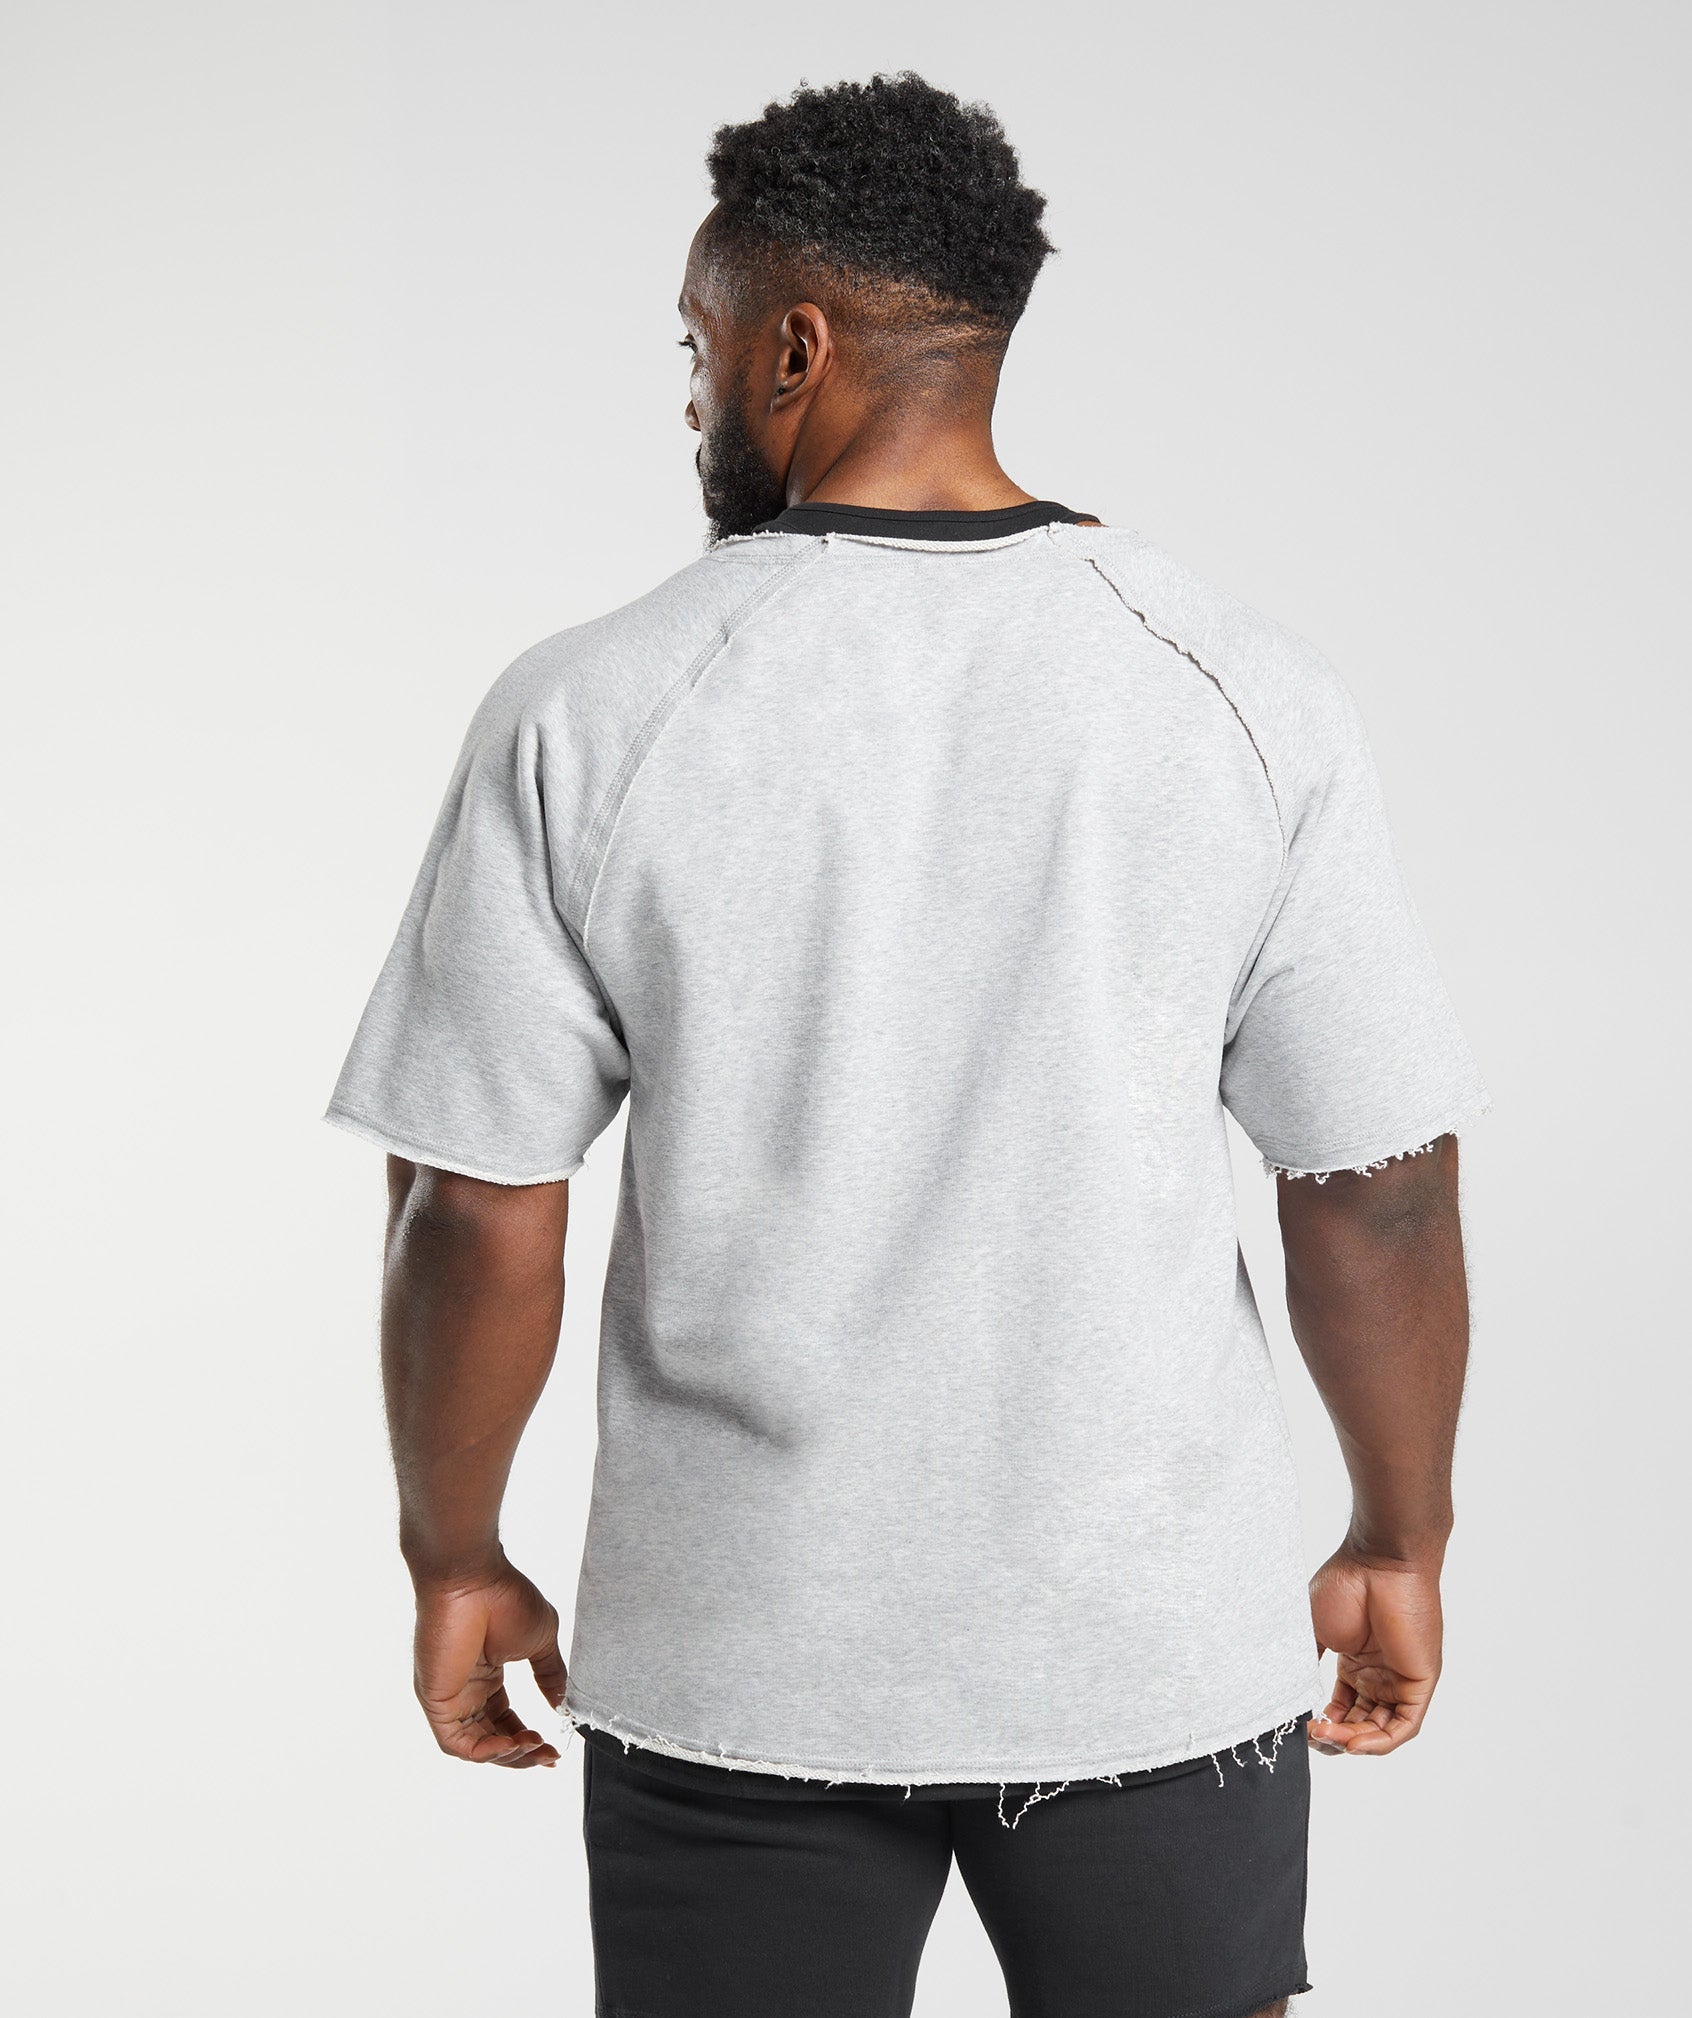 Legacy Rag Top in Light Grey Core Marl - view 2